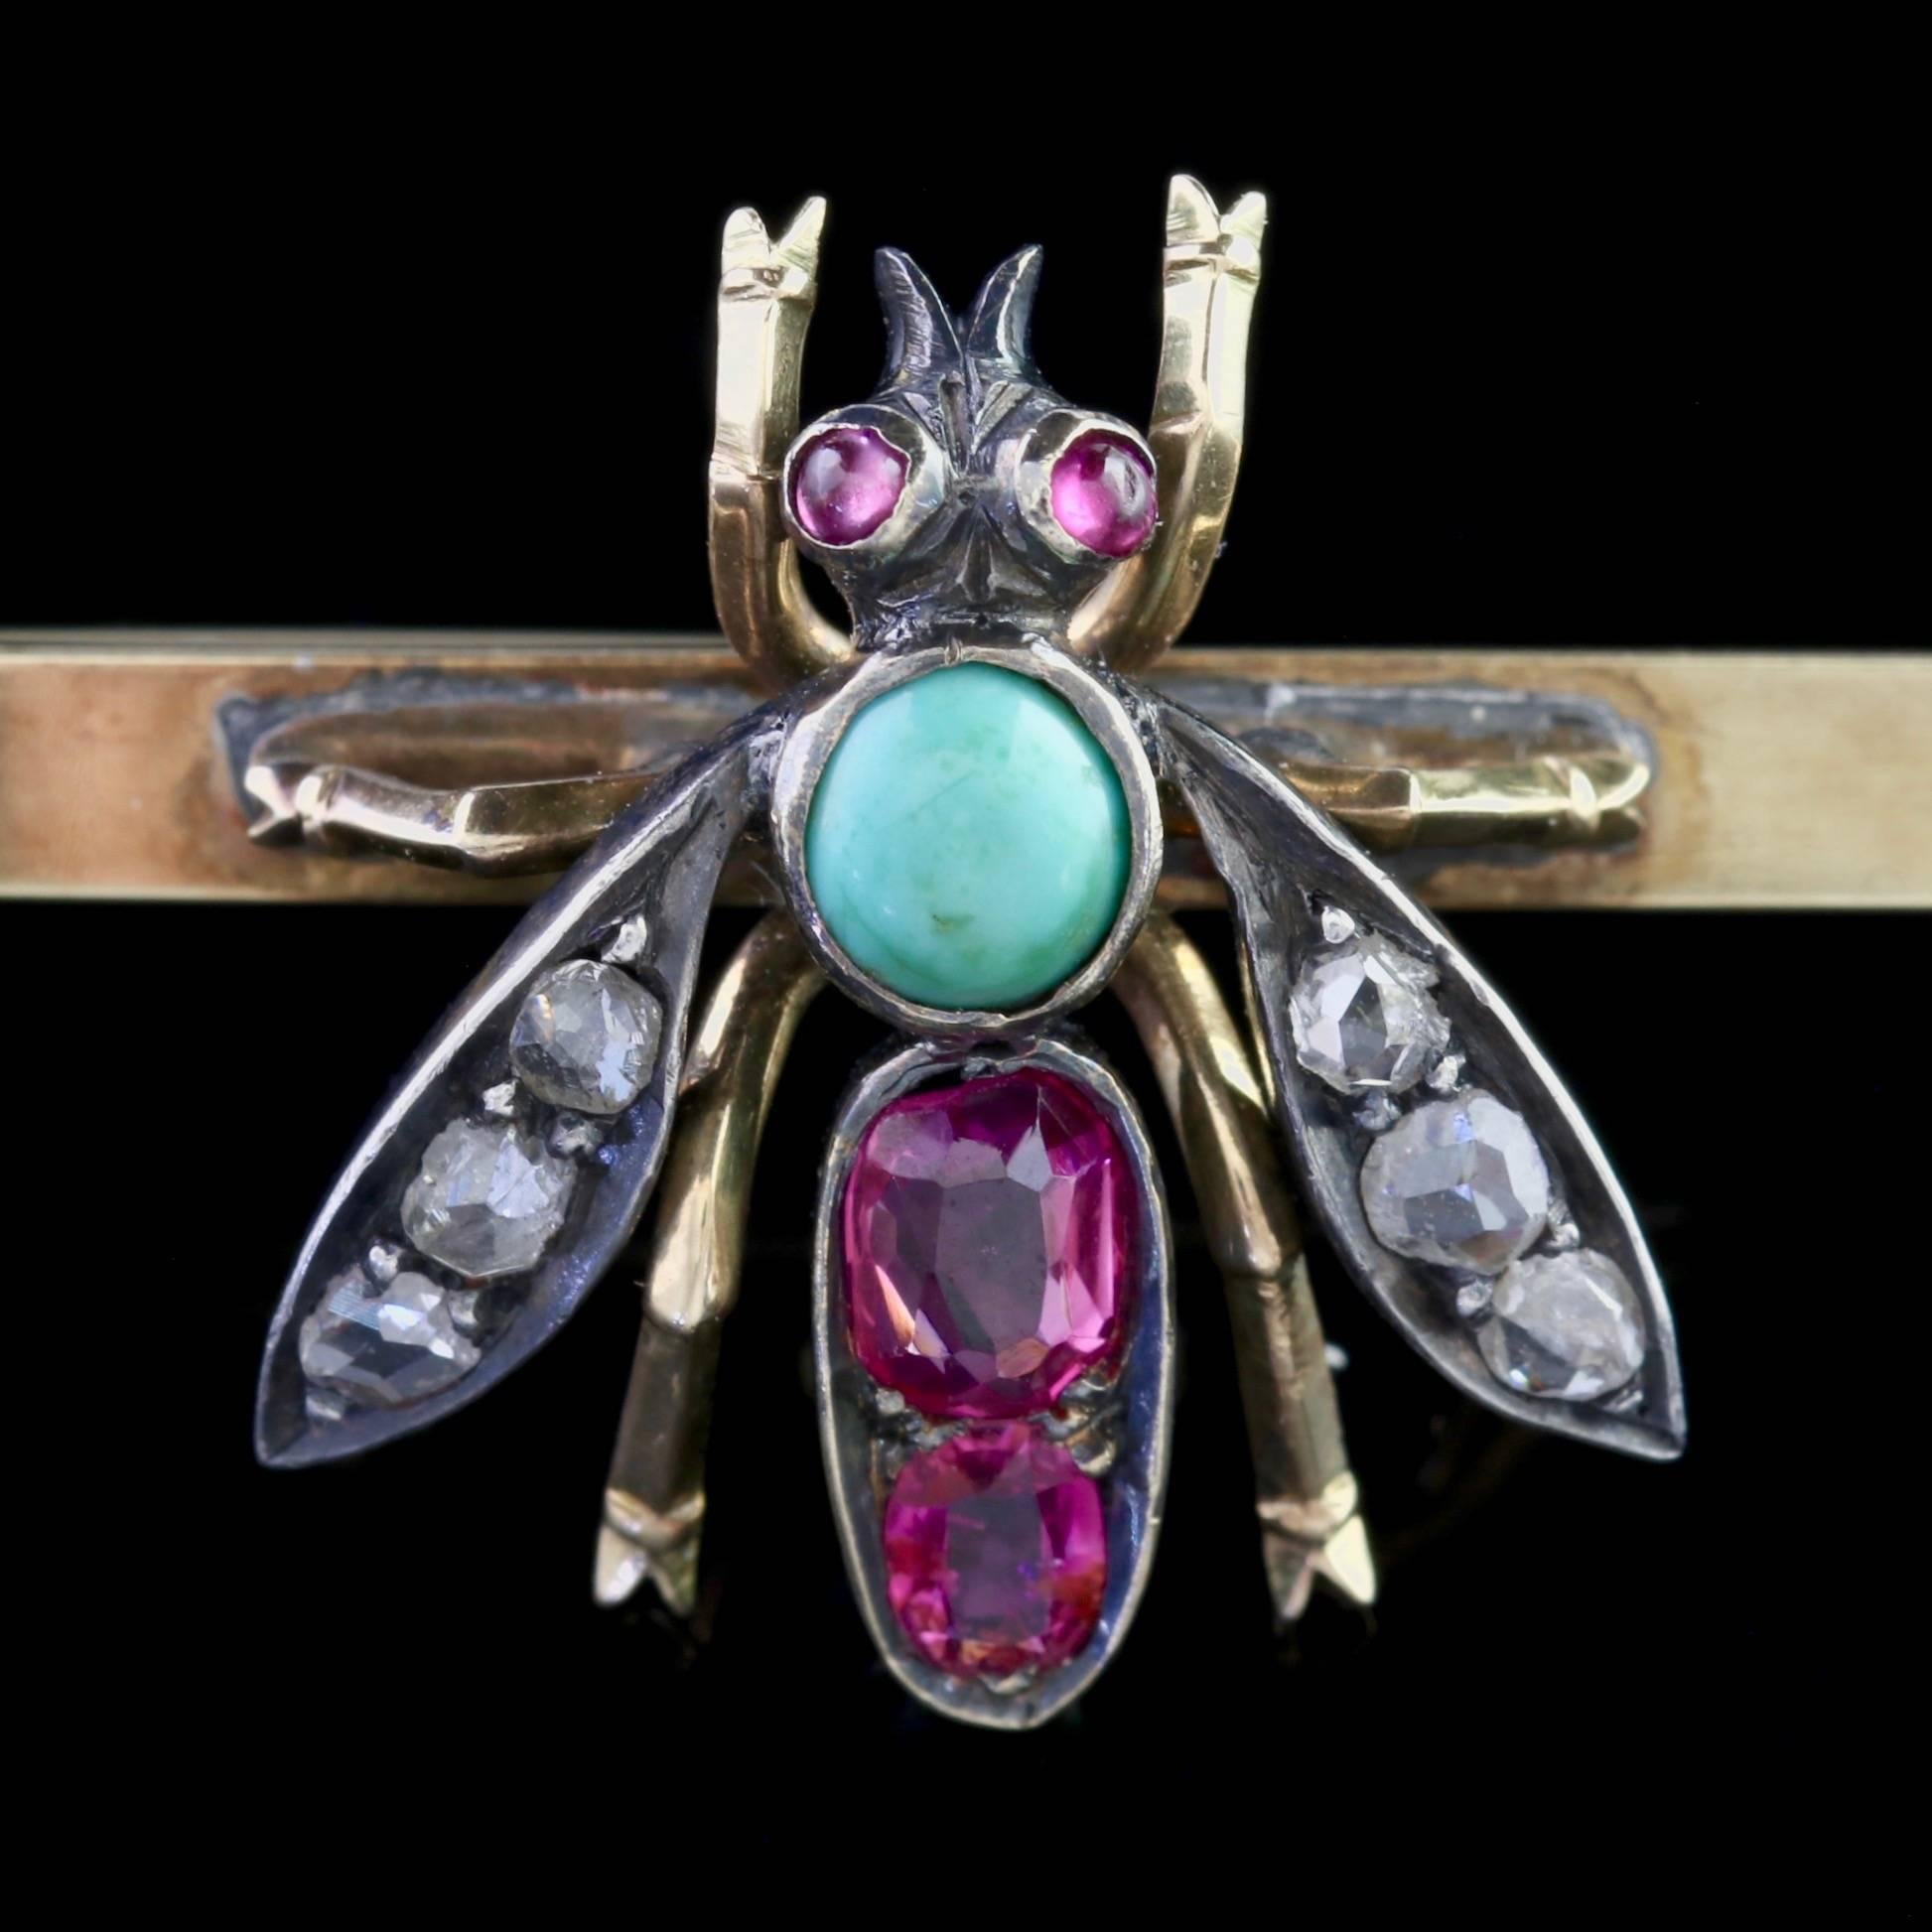 To read more please click continue reading below-

This fabulous antique Victorian Silver and 15ct Yellow Gold insect brooch is Circa 1900.

Insect jewellery today is highly collectable and was considered a symbol of good luck to the wearer during